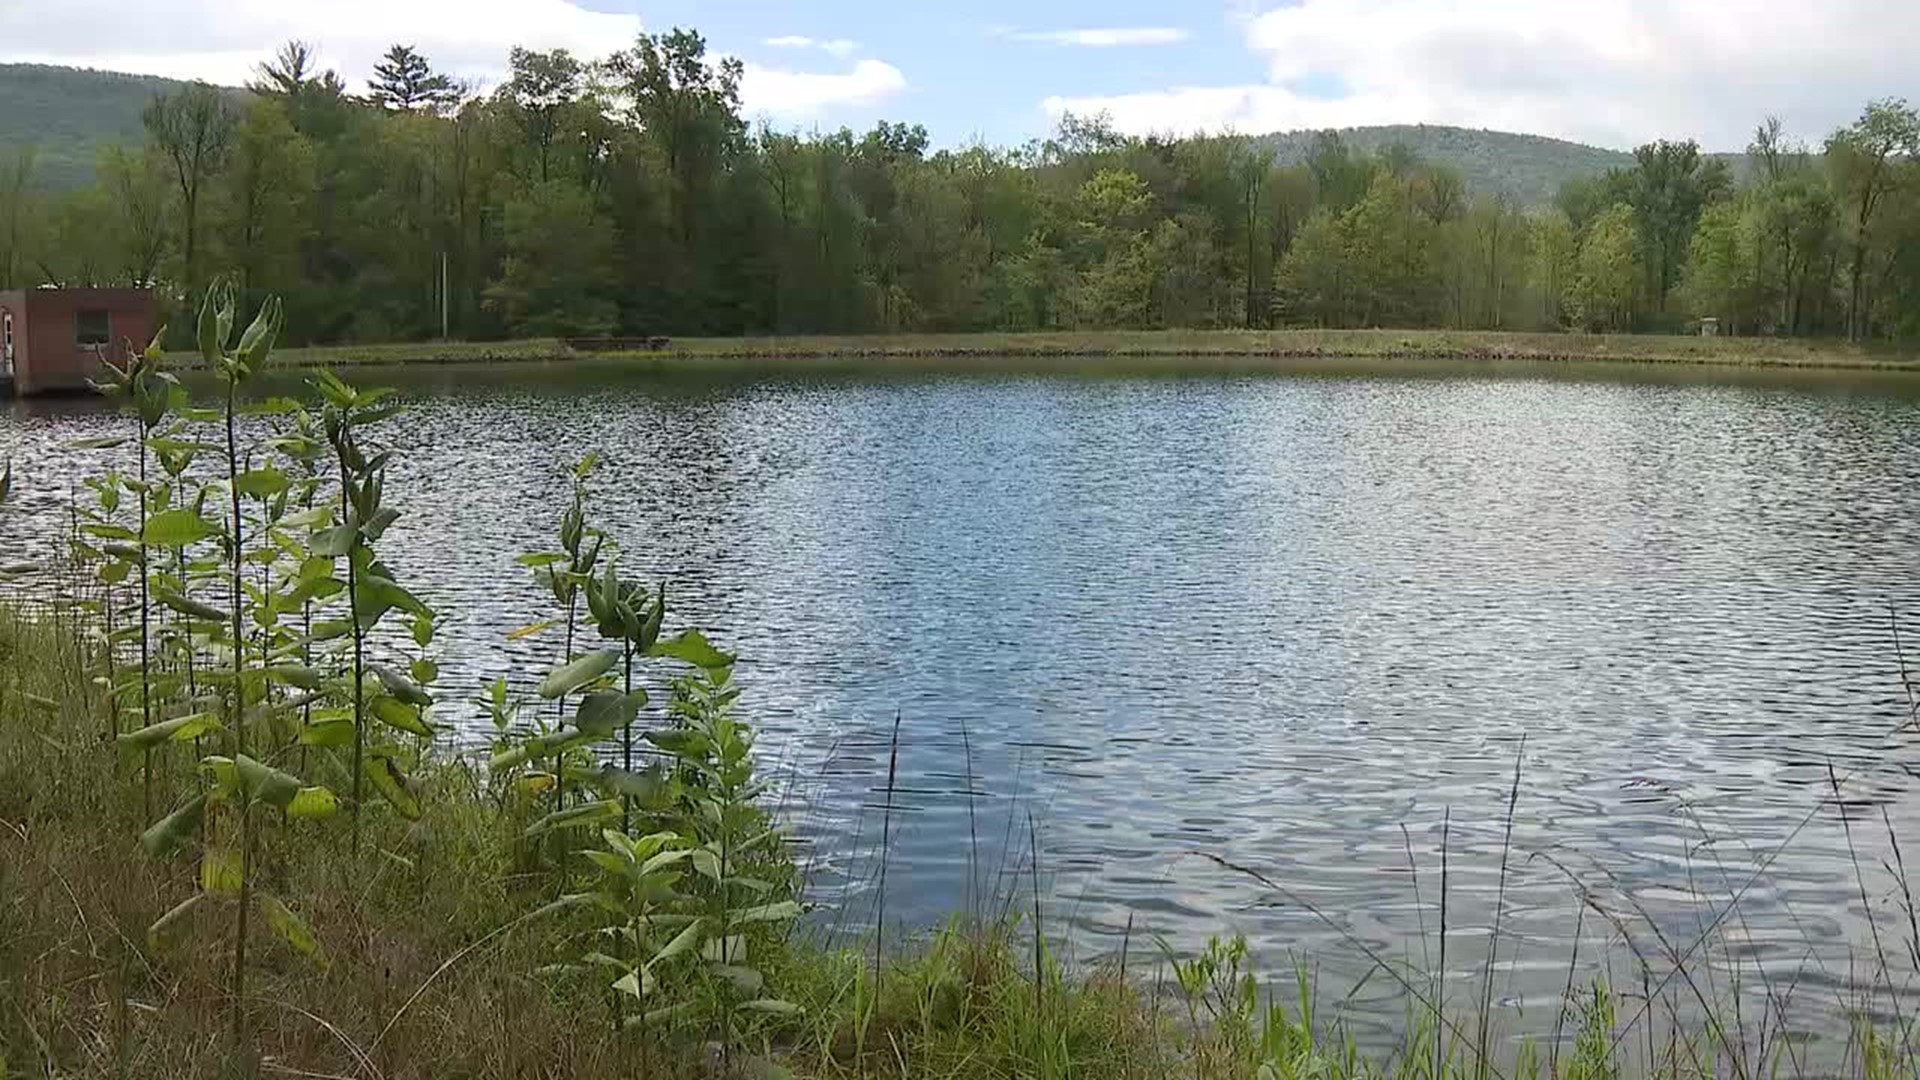 It's been a dry summer, but when it comes to water supply, Lycoming County is in good shape.